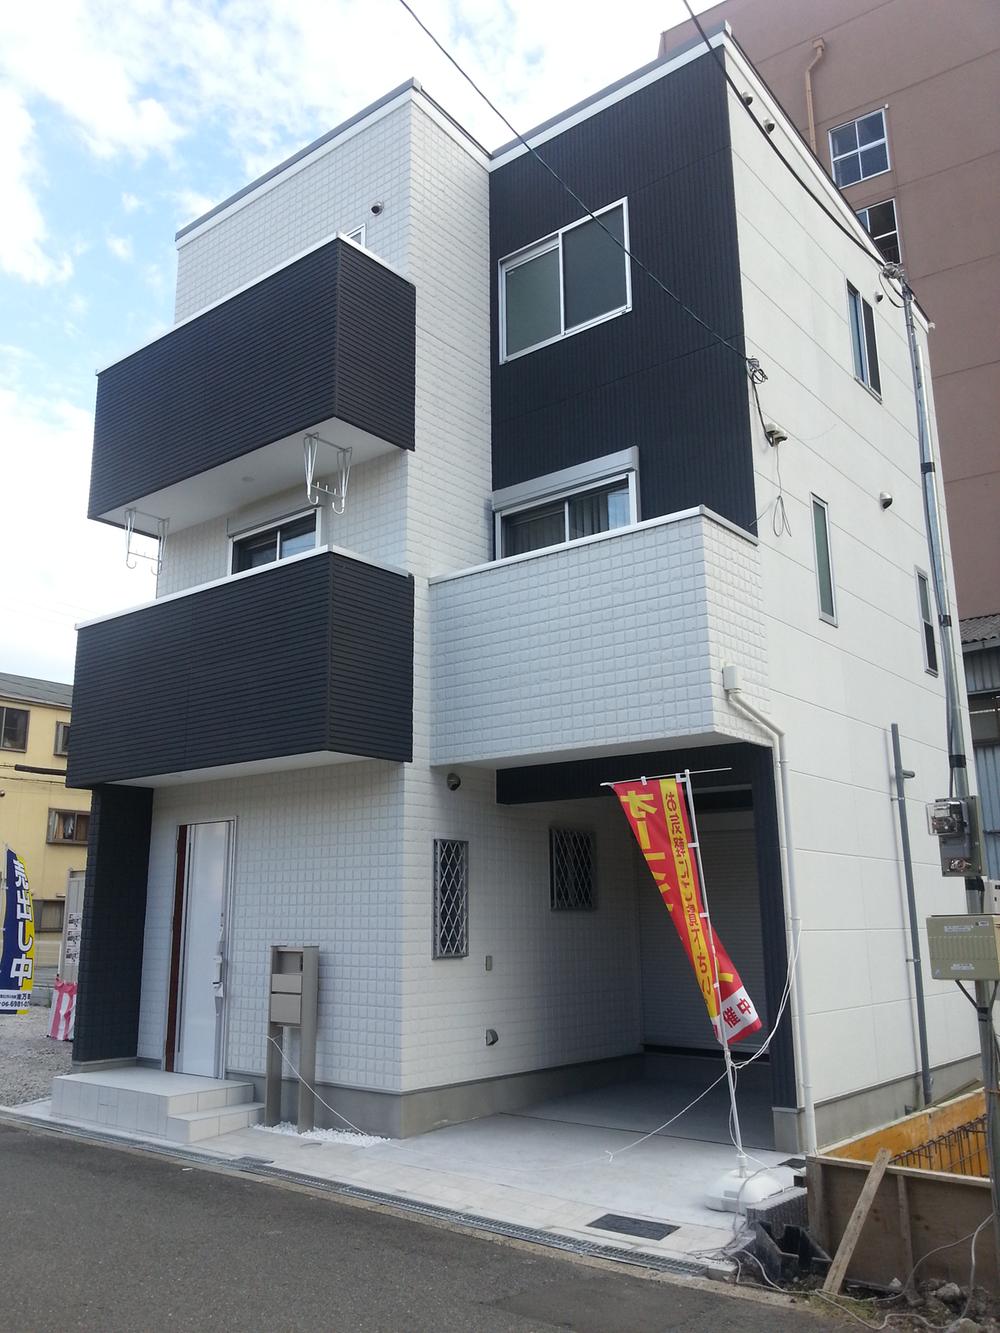 Local appearance photo. Local model house. Outer wall is adopted Asahi Kasei Power Board.